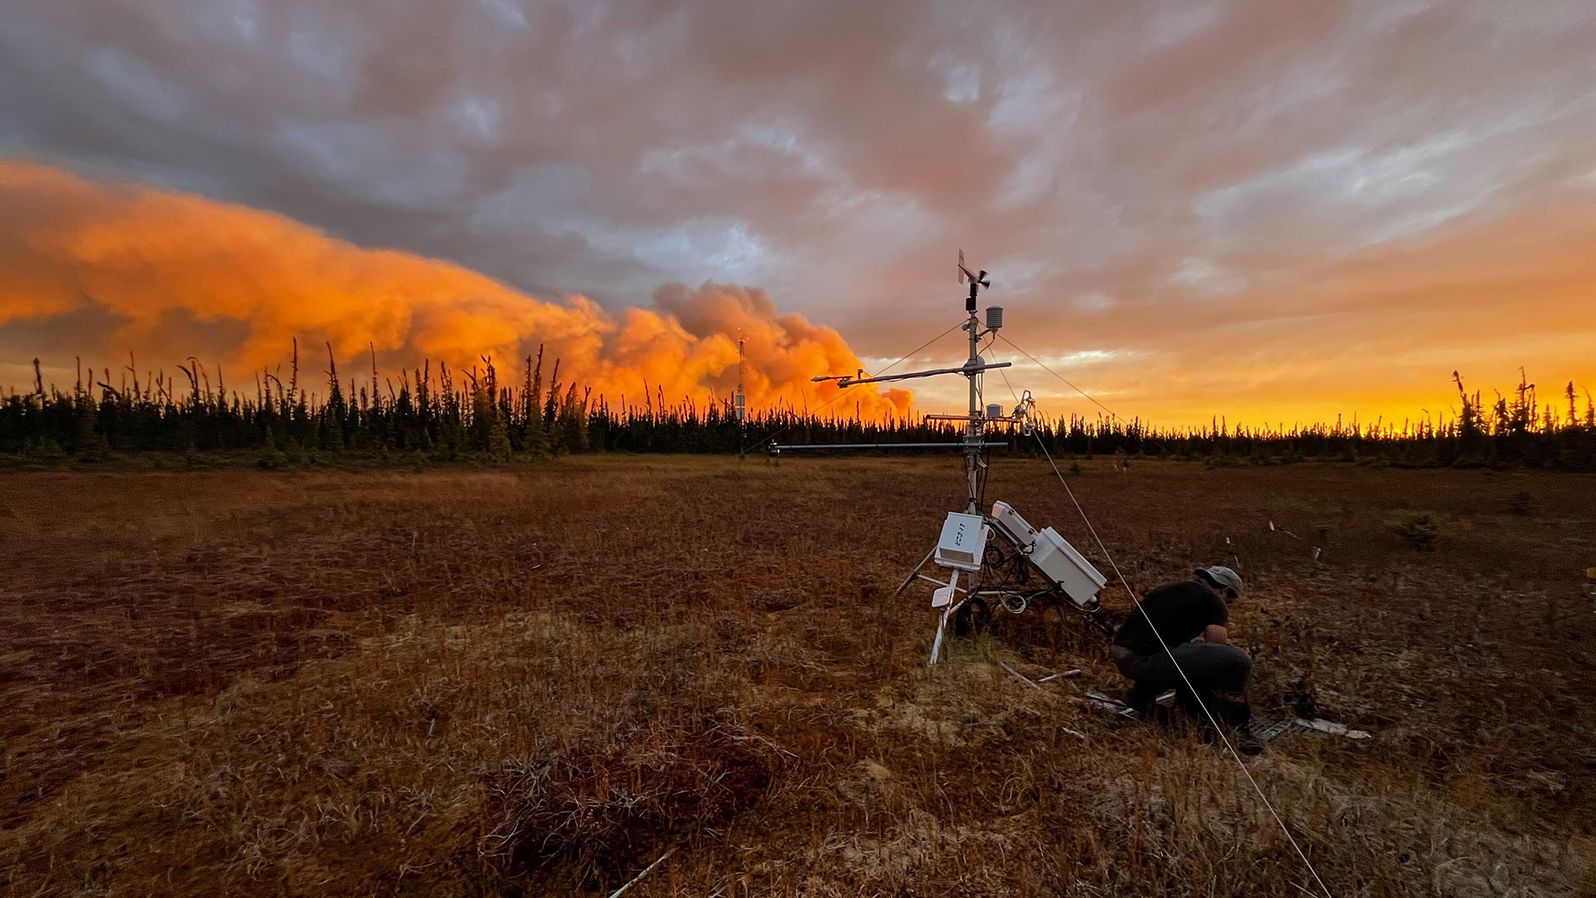 Smoke from a wildfire is visible behind a permafrost monitoring tower at the Scotty Creek Research Station in Canada's Northwest Territories in September. The tower burned down in October from unusual wildfire activity.
